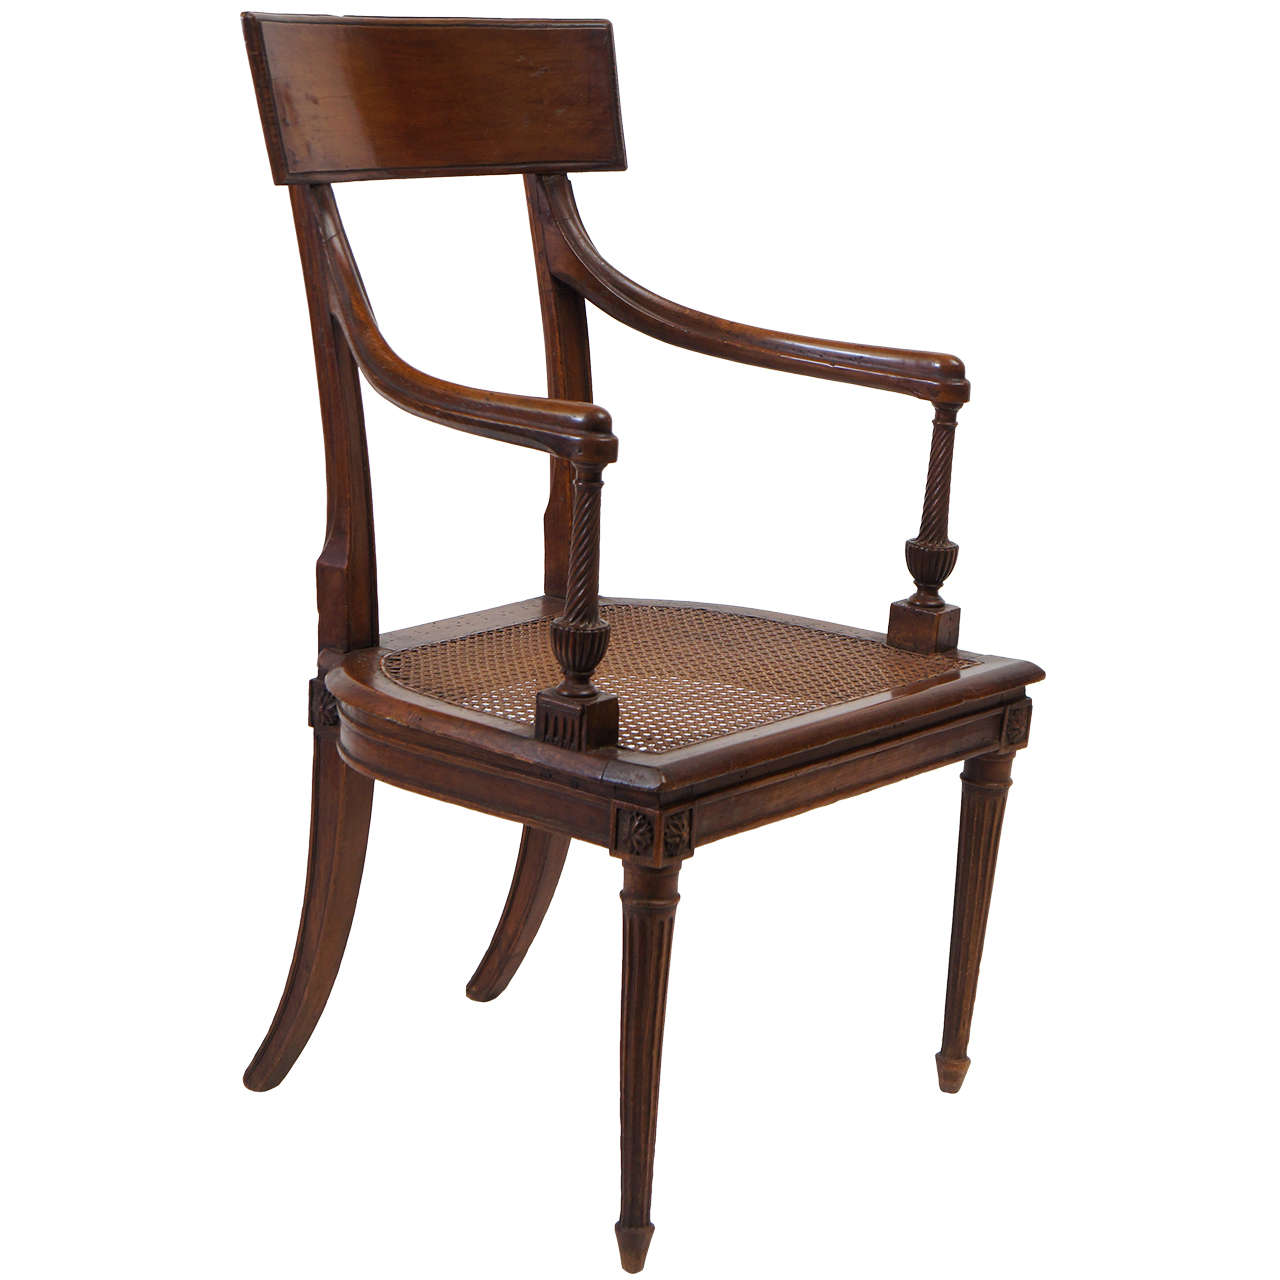 Louis XVI Fauteuil or Armchair Attributed to Georges Jacob, France, circa 1785 For Sale